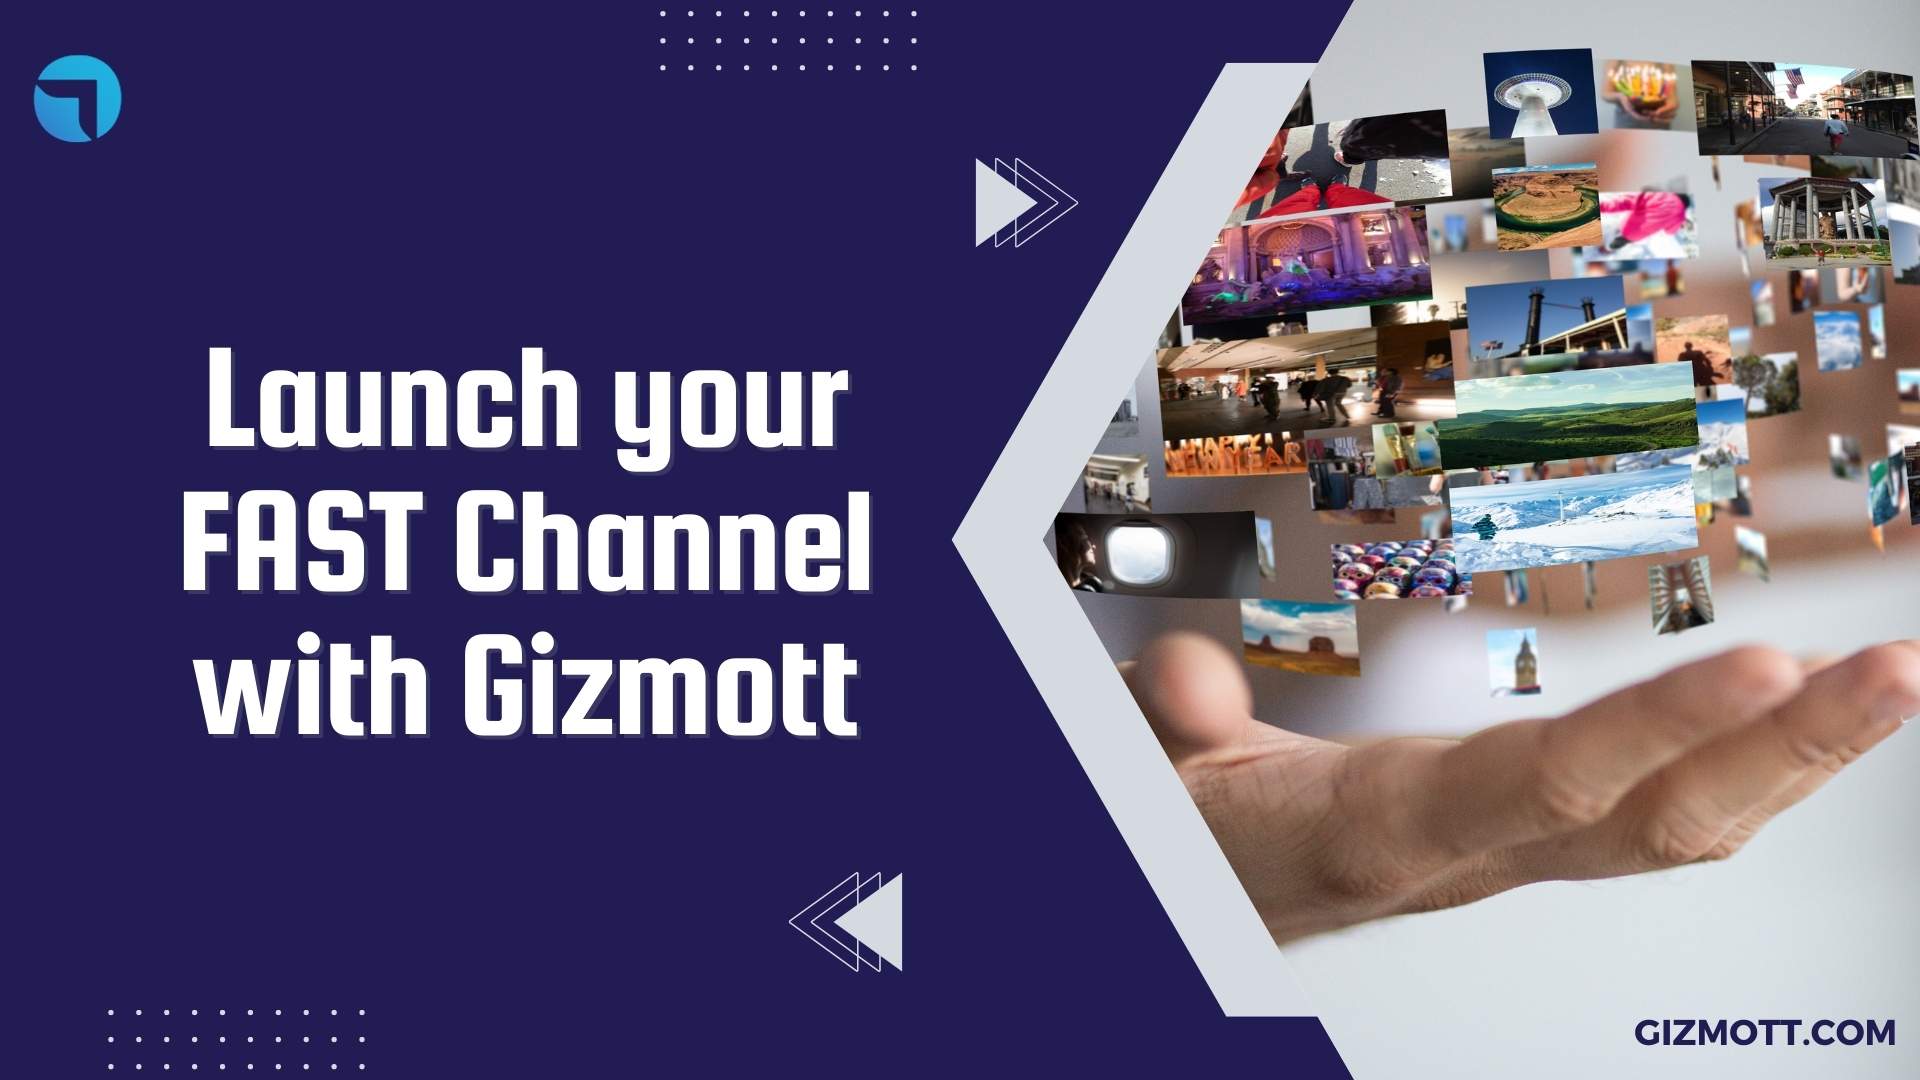 Launch your FAST Channel with Gizmott.